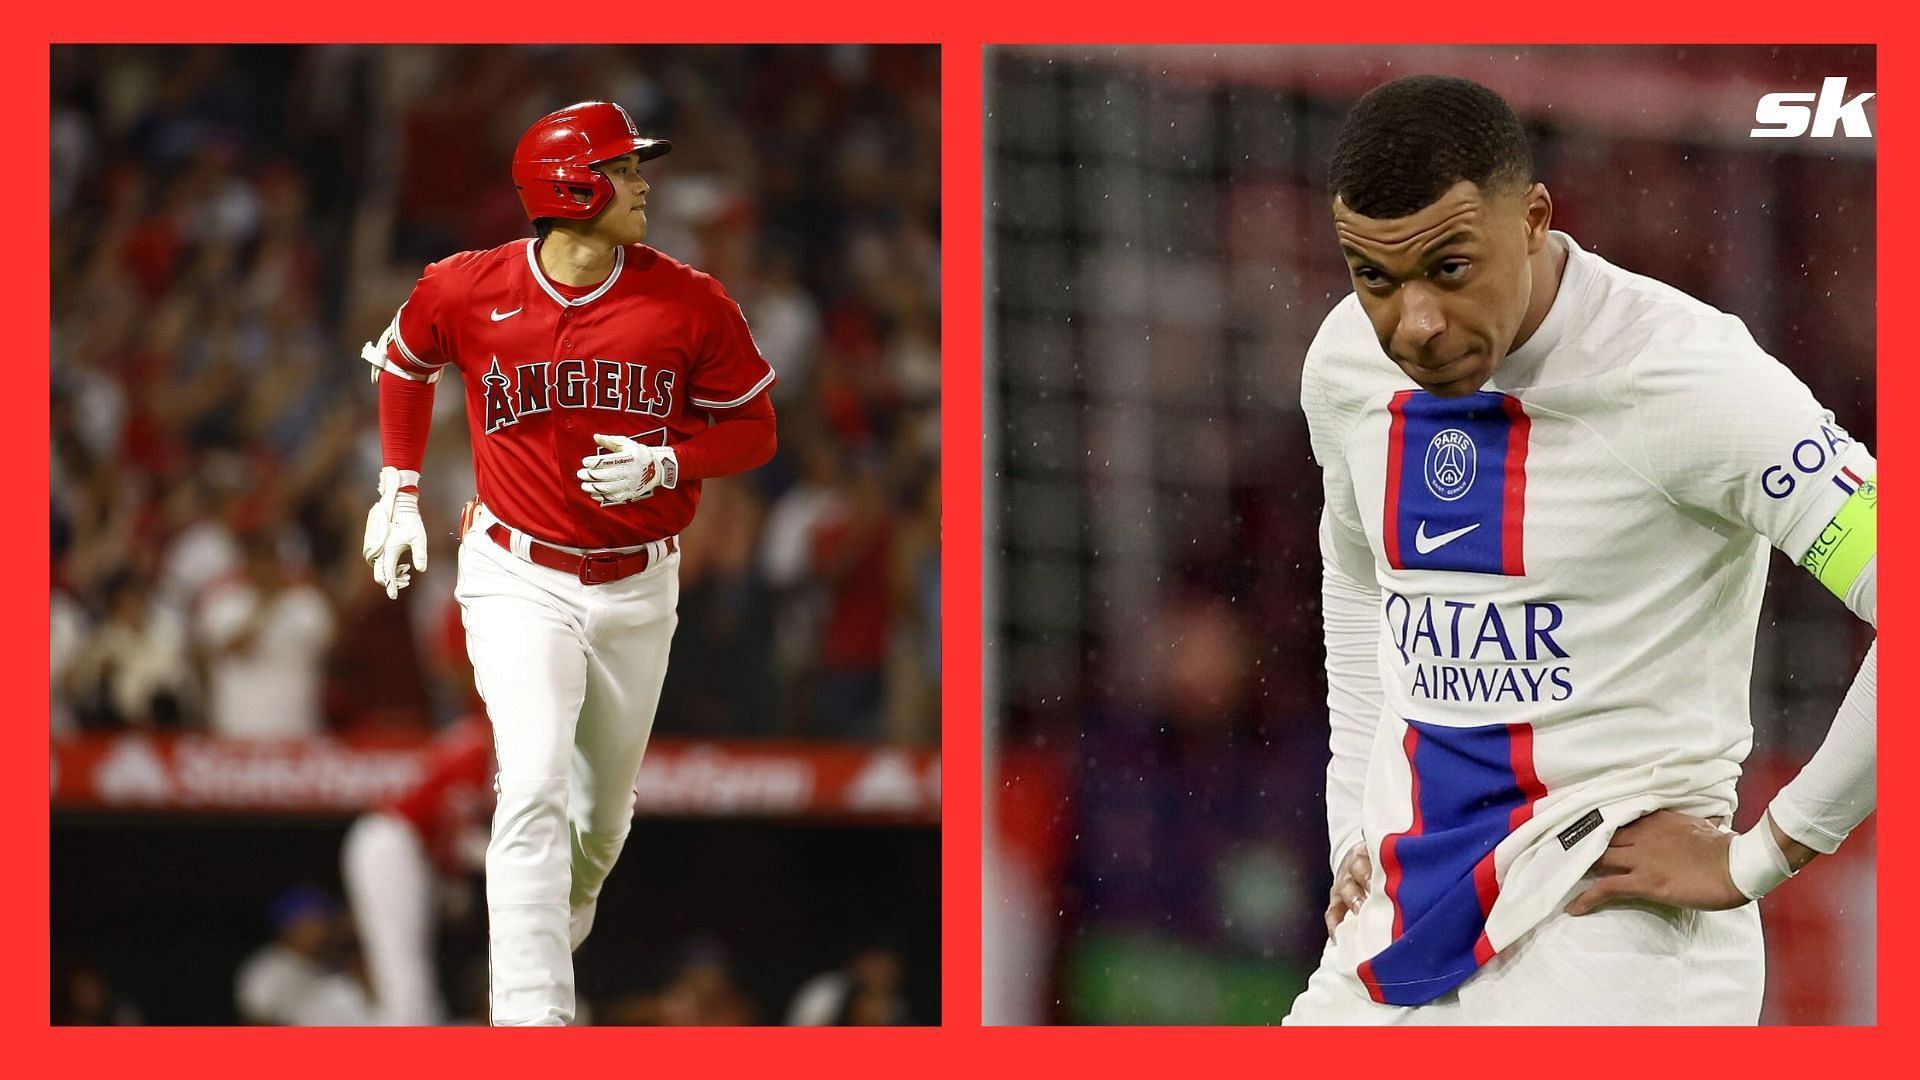 Is Shohei Ohtani going to get a bigger contract than Kylian Mbappe in free agency?